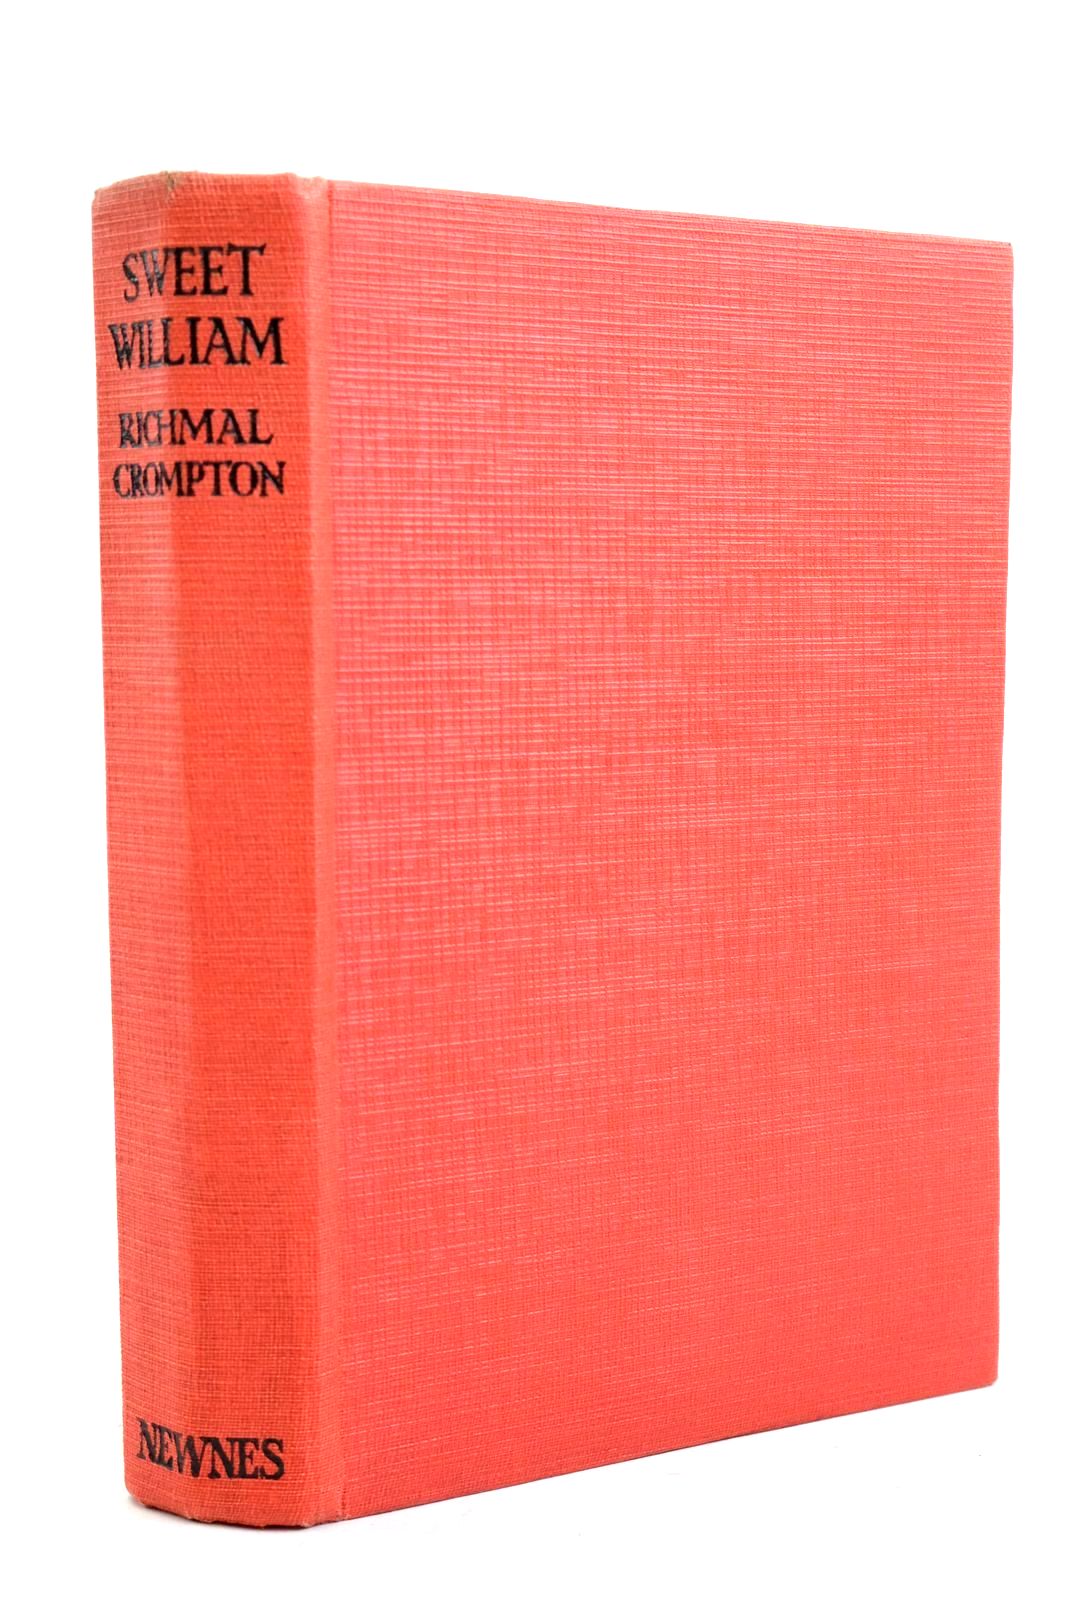 Photo of SWEET WILLIAM written by Crompton, Richmal illustrated by Henry, Thomas published by George Newnes Limited (STOCK CODE: 1320818)  for sale by Stella & Rose's Books